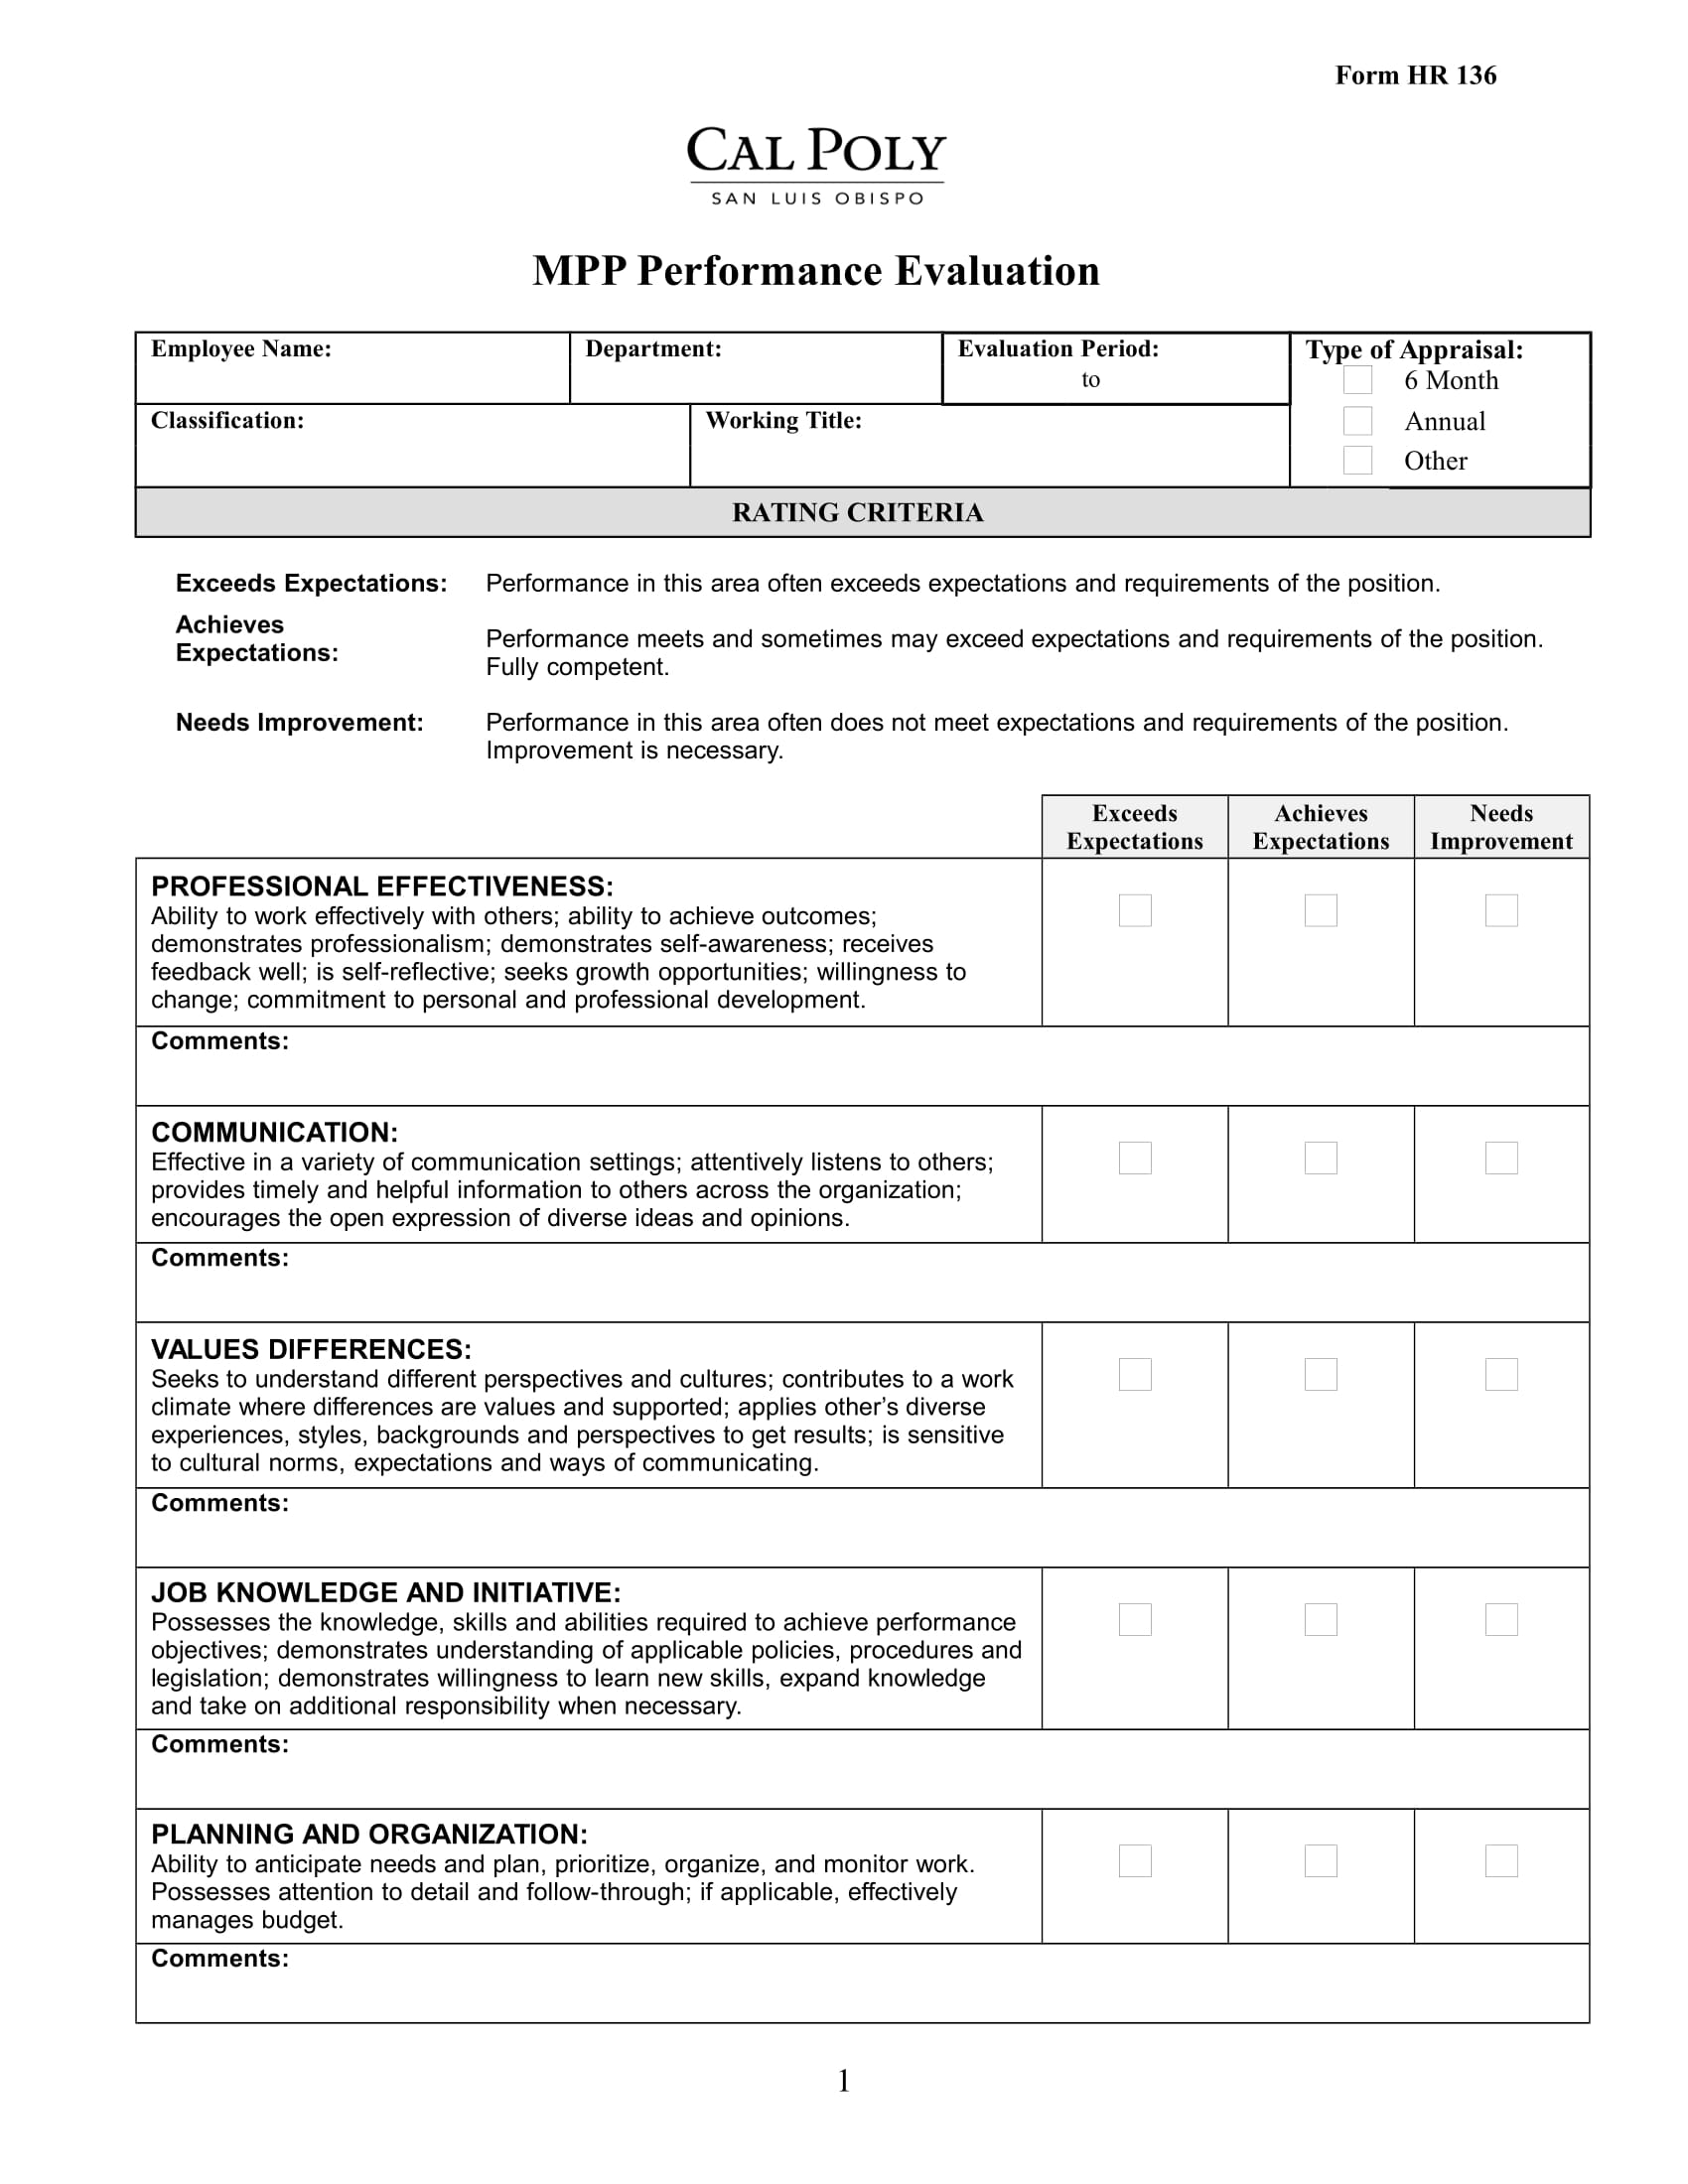 manager performance evaluation form 1